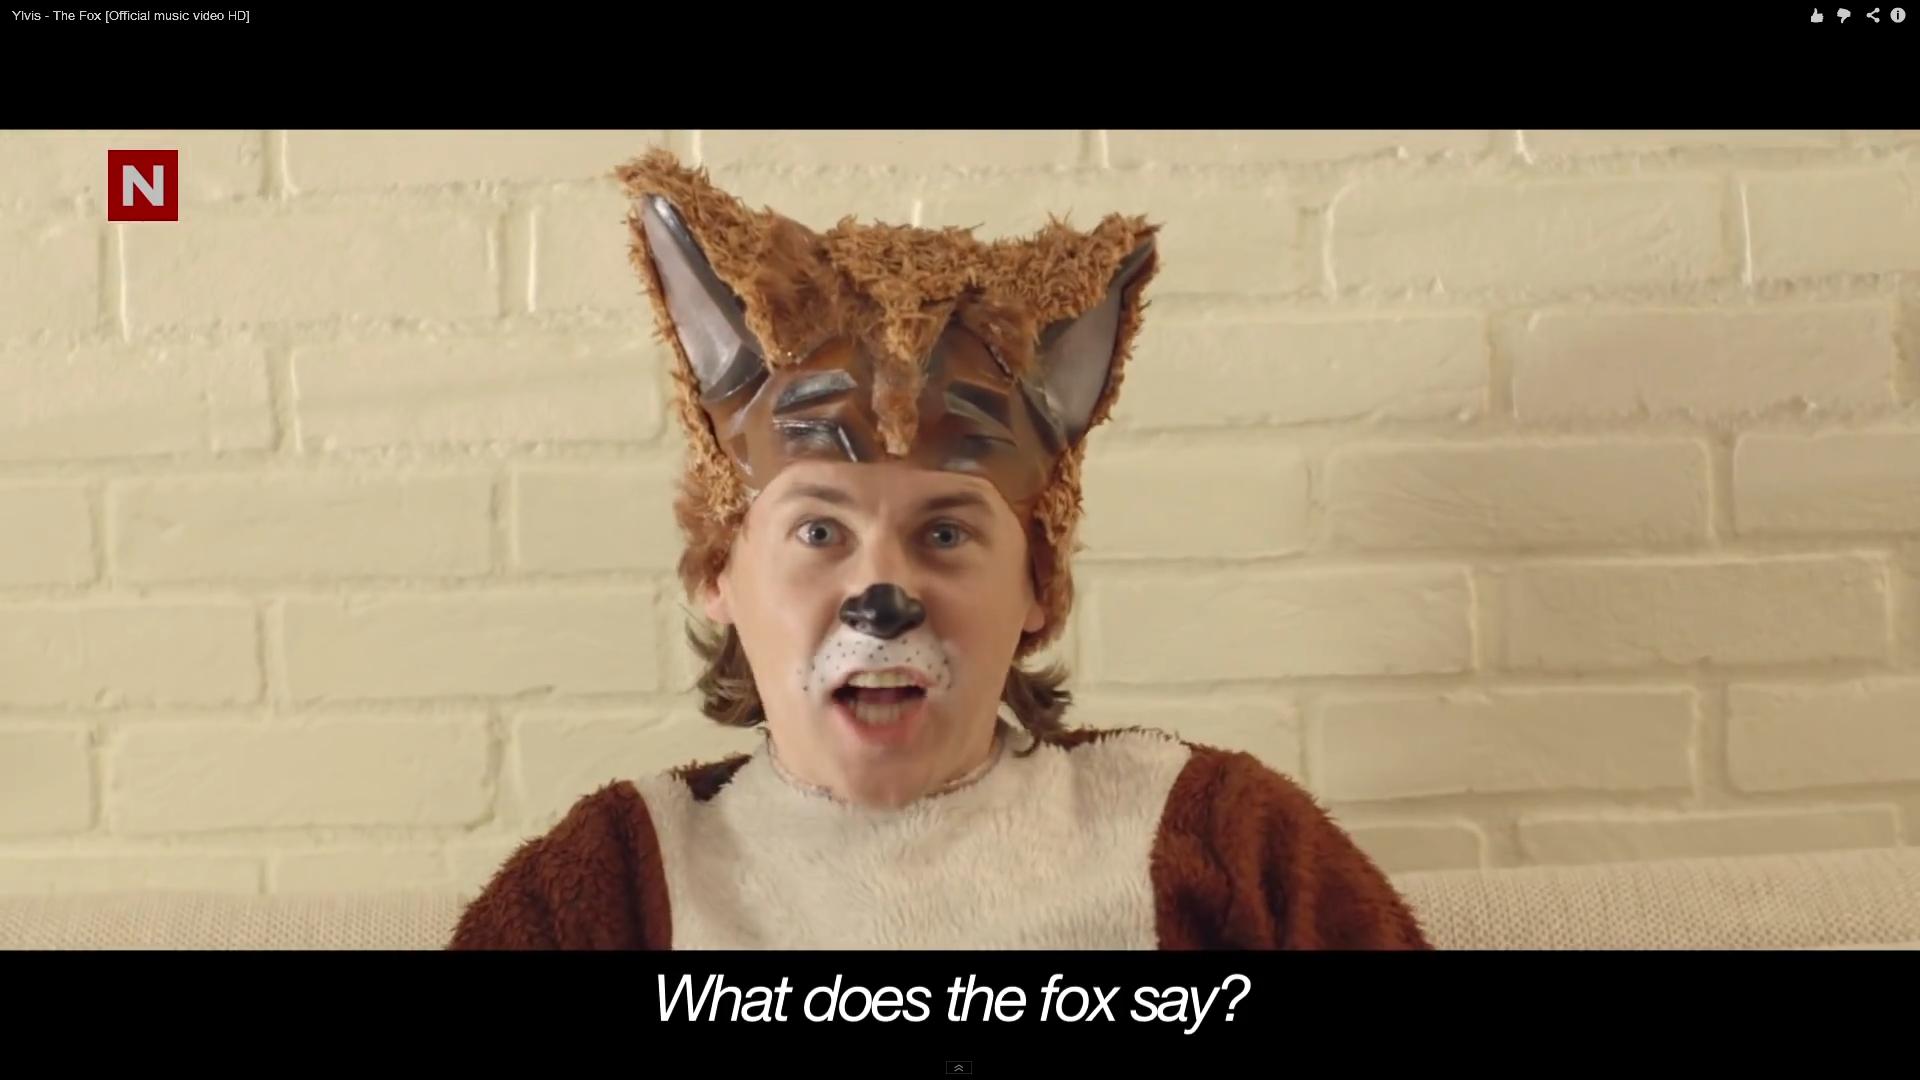 This shit is blowing up on youtube. What does the fox say?